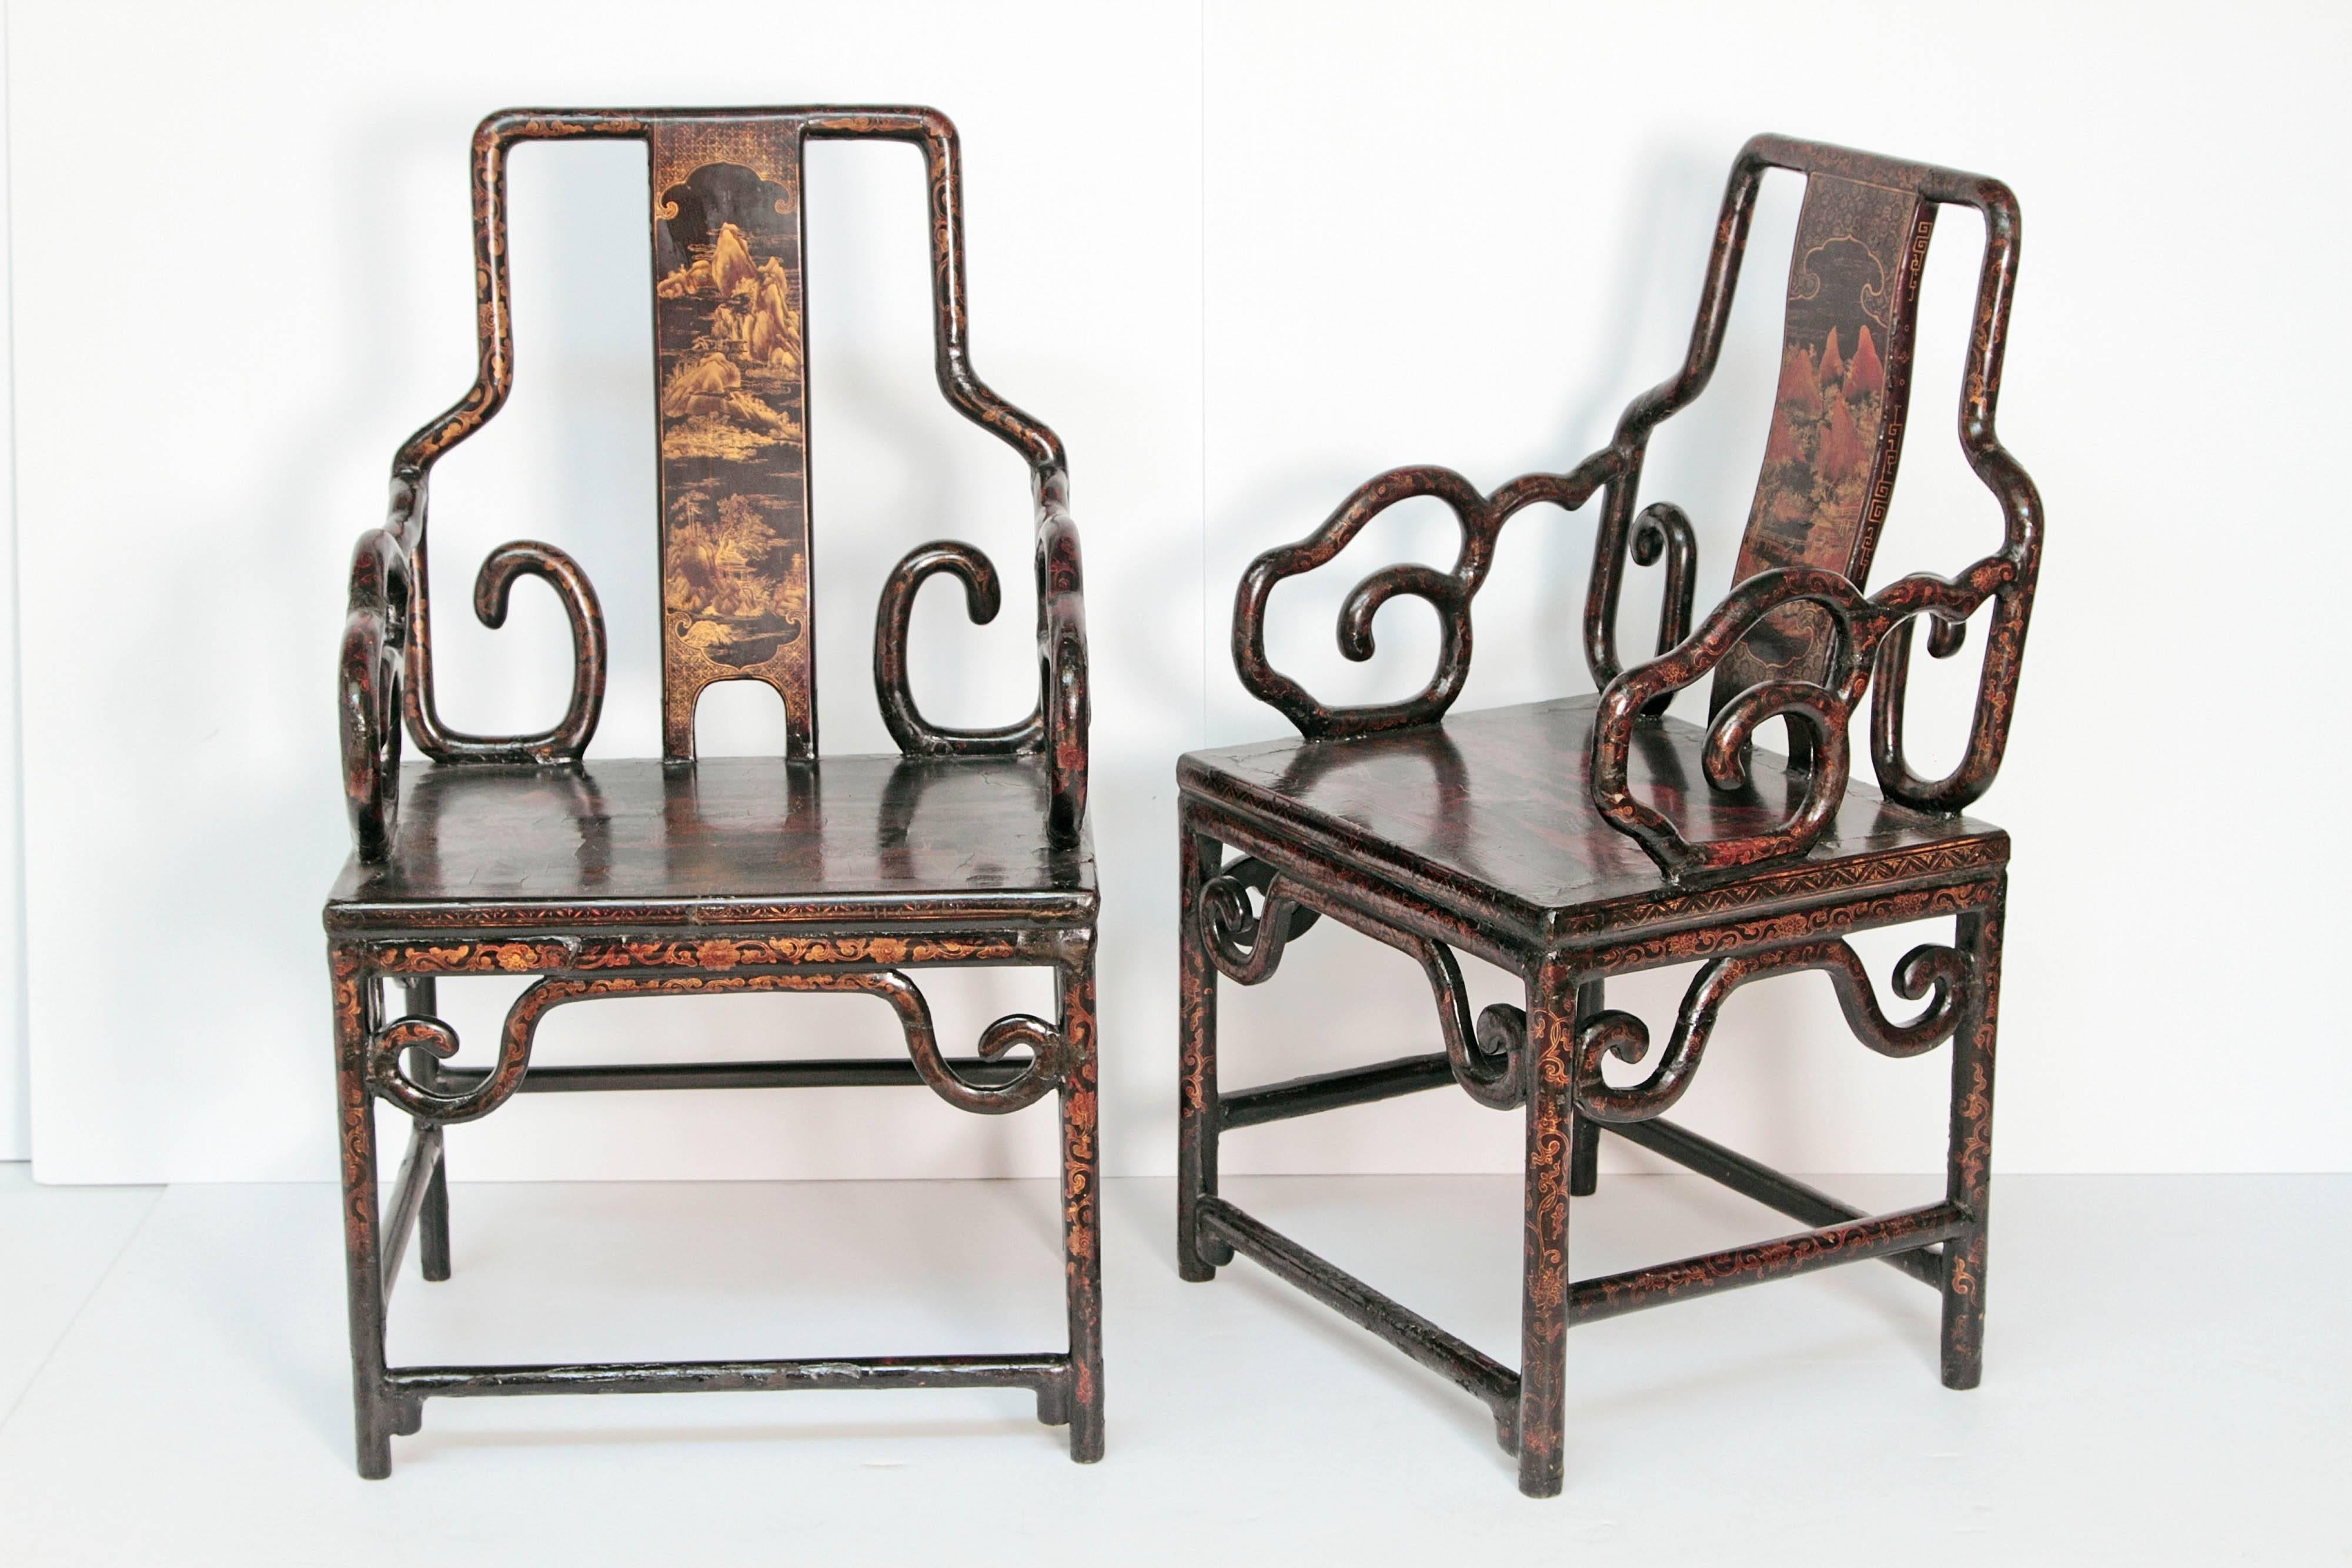 Lacquered Pair of Chinese Black Lacquer Armchairs, Late 19th Century